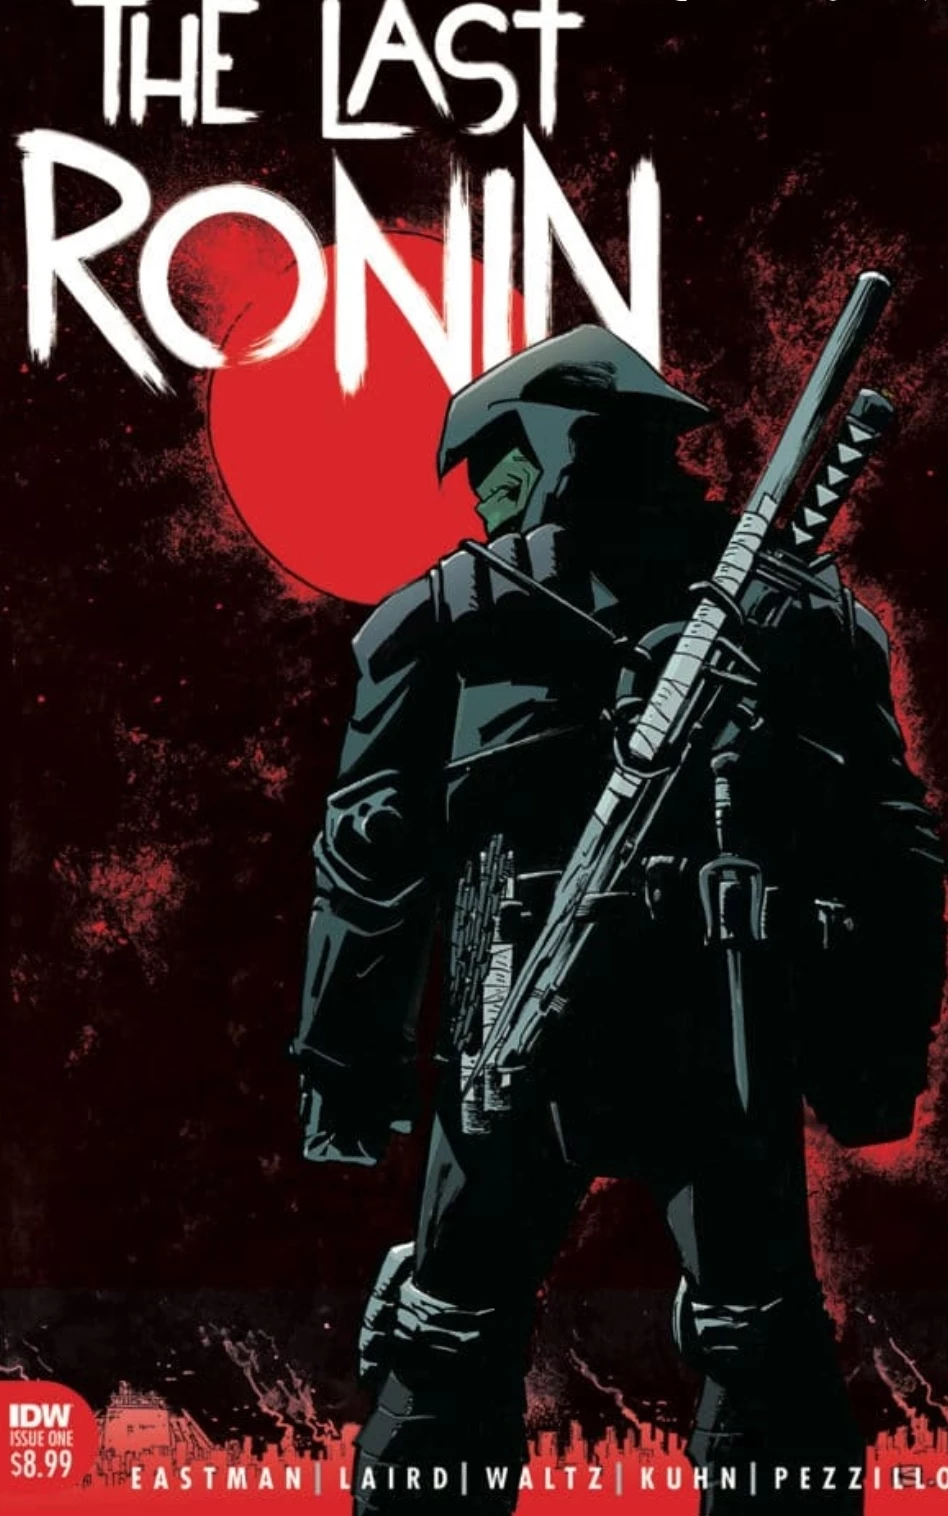 download rise of the ronin pc